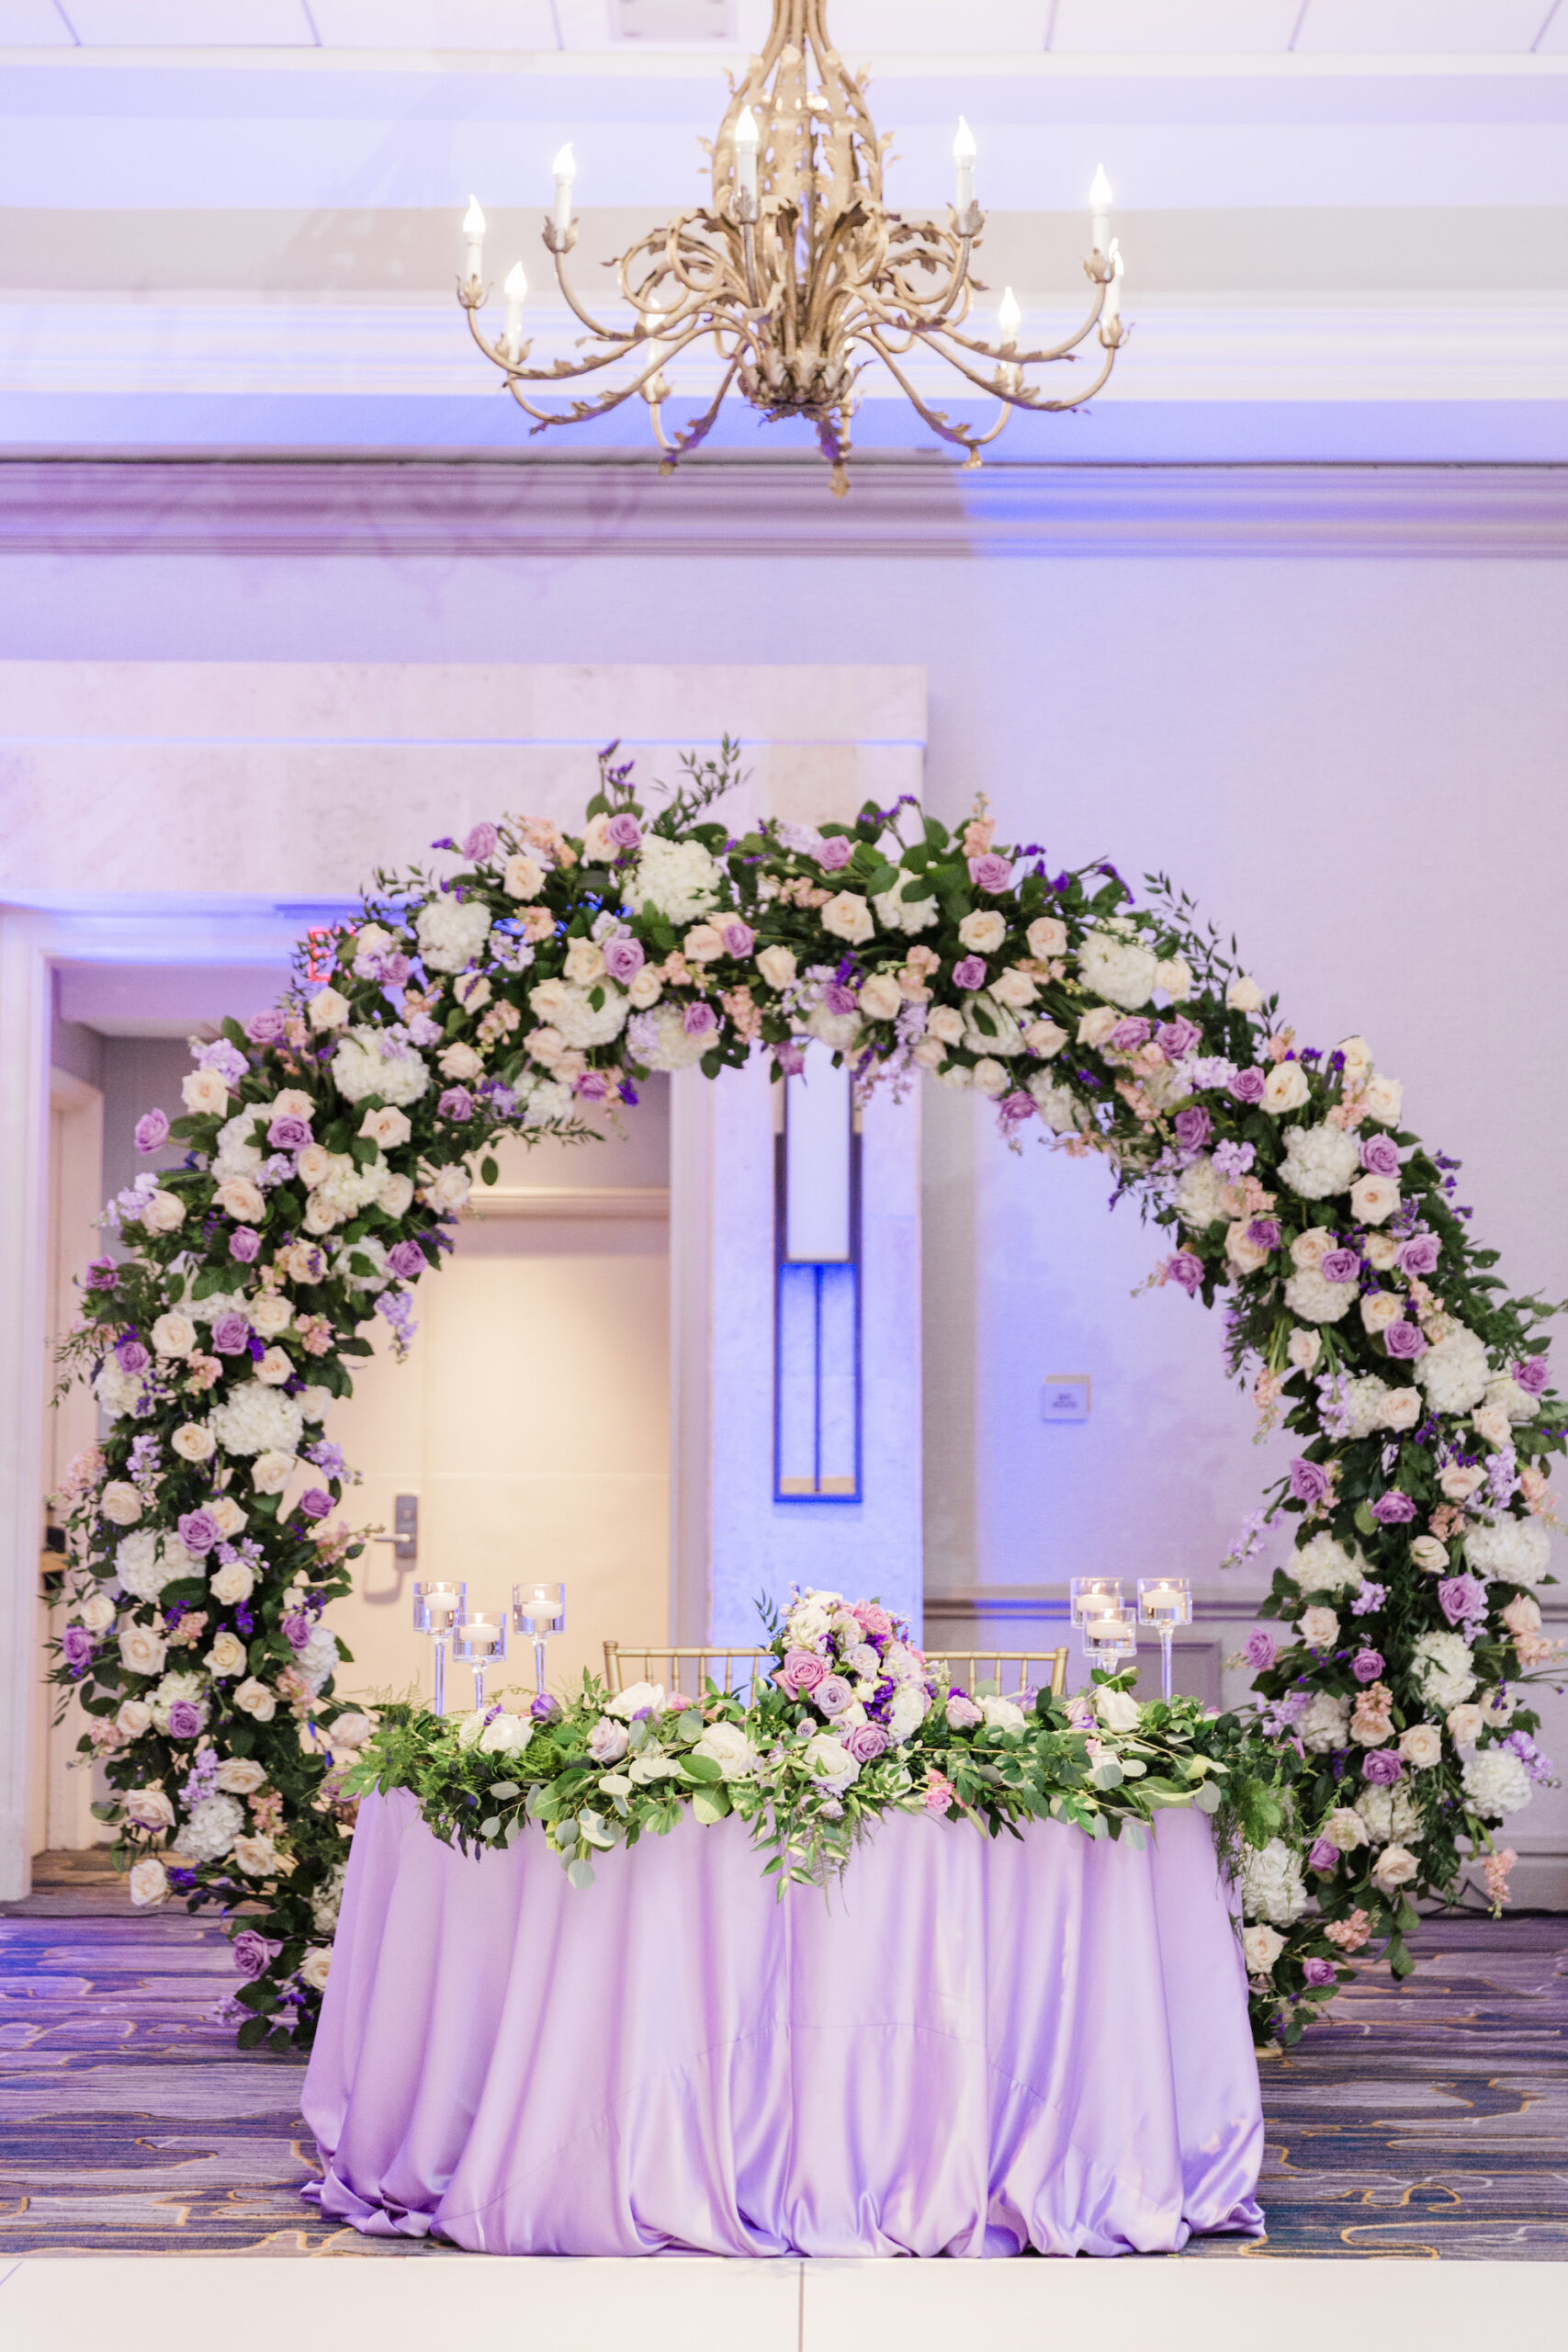 Round Flower Arch Ideas with Purple and Blush Roses, White Hydrangeas, and Greenery | Lavender Linen | Indian Wedding Reception Sweetheart Table Decor Inspiration | Tampa Bay Planner Coastal Coordinating